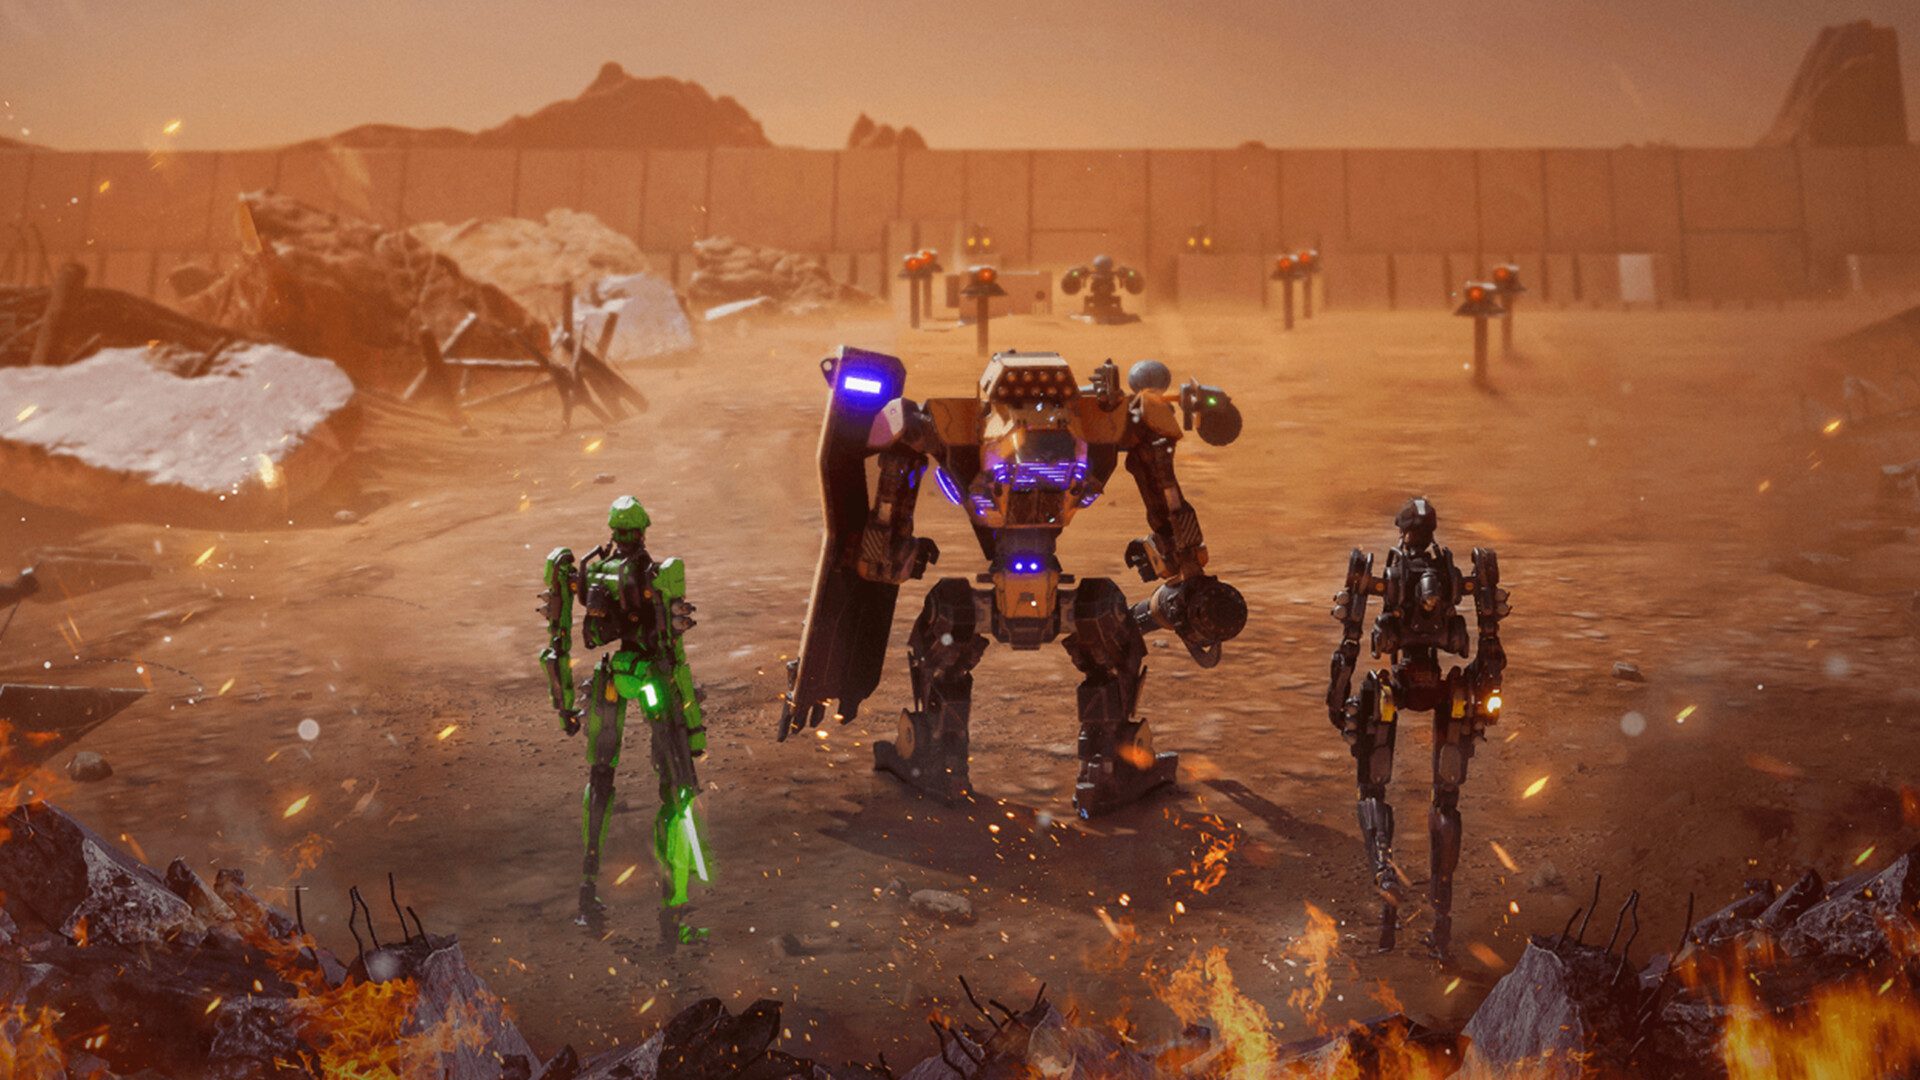 You are currently viewing <strong>Space Gears: Terraform Mars and Command Mech Armies in This Innovative Sci-Fi RTS Game</strong>